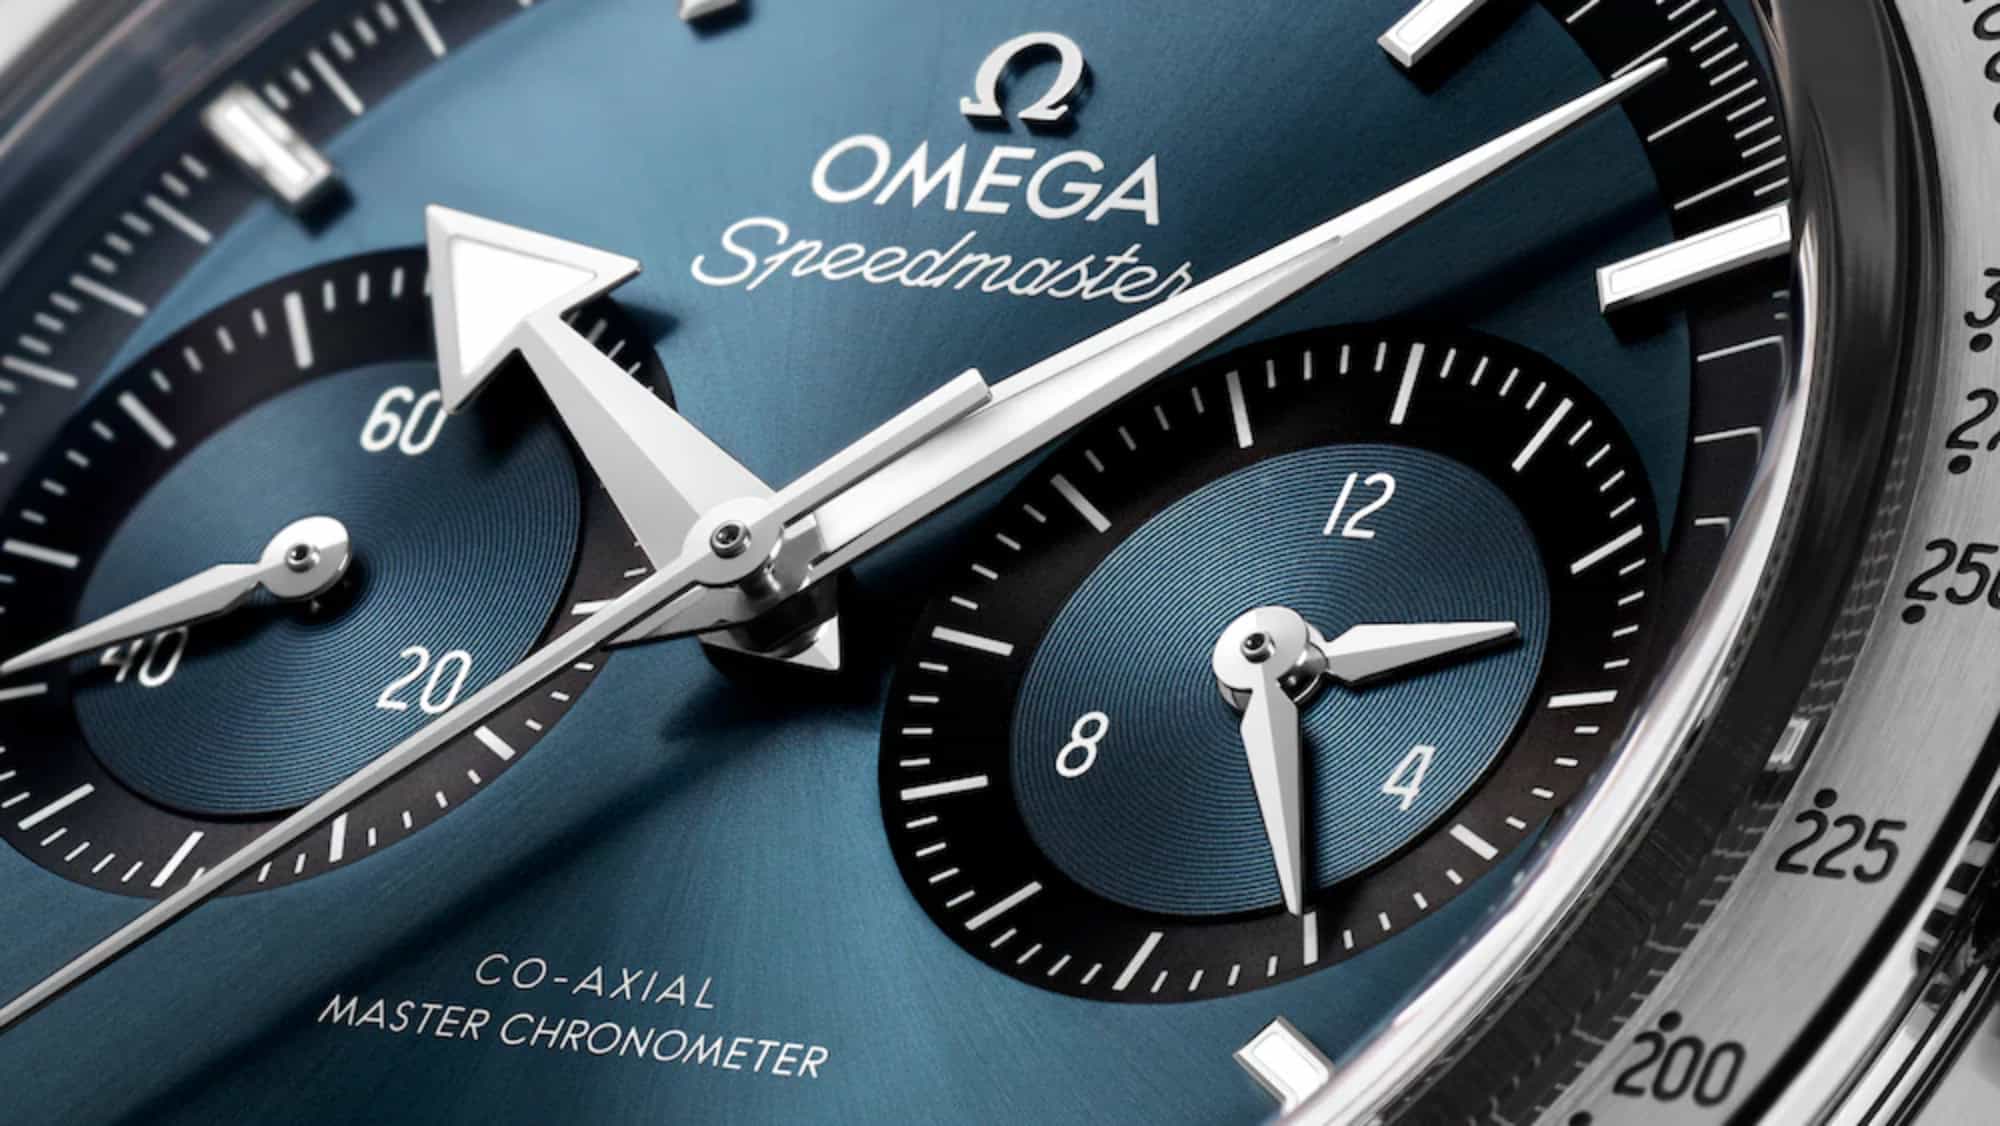 How to wind an omega watch